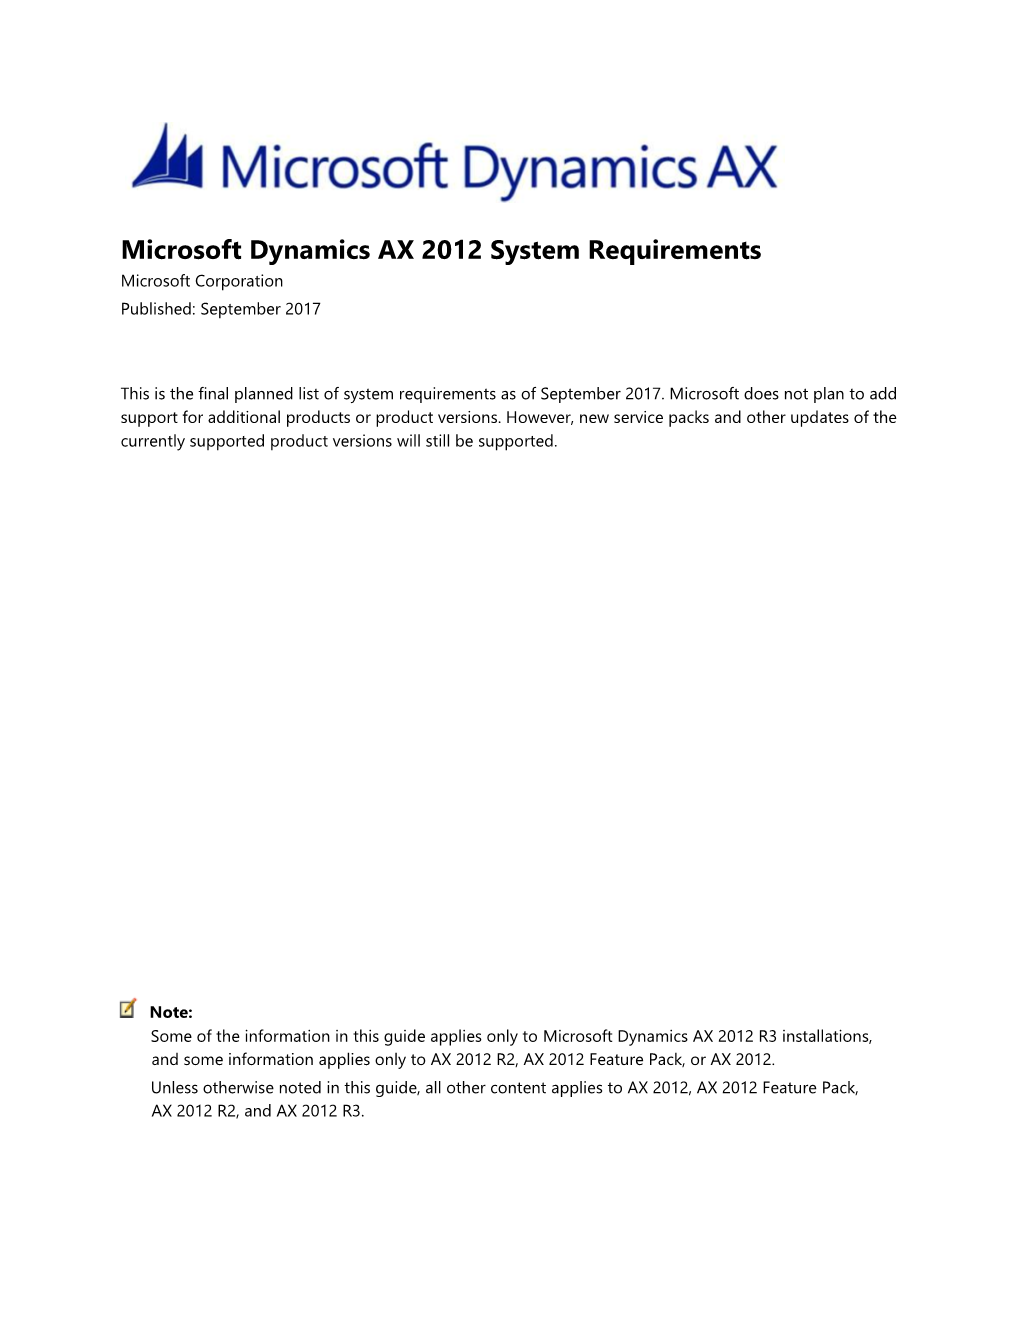 Microsoft Dynamics AX 2012 System Requirements Microsoft Corporation Published: September 2017